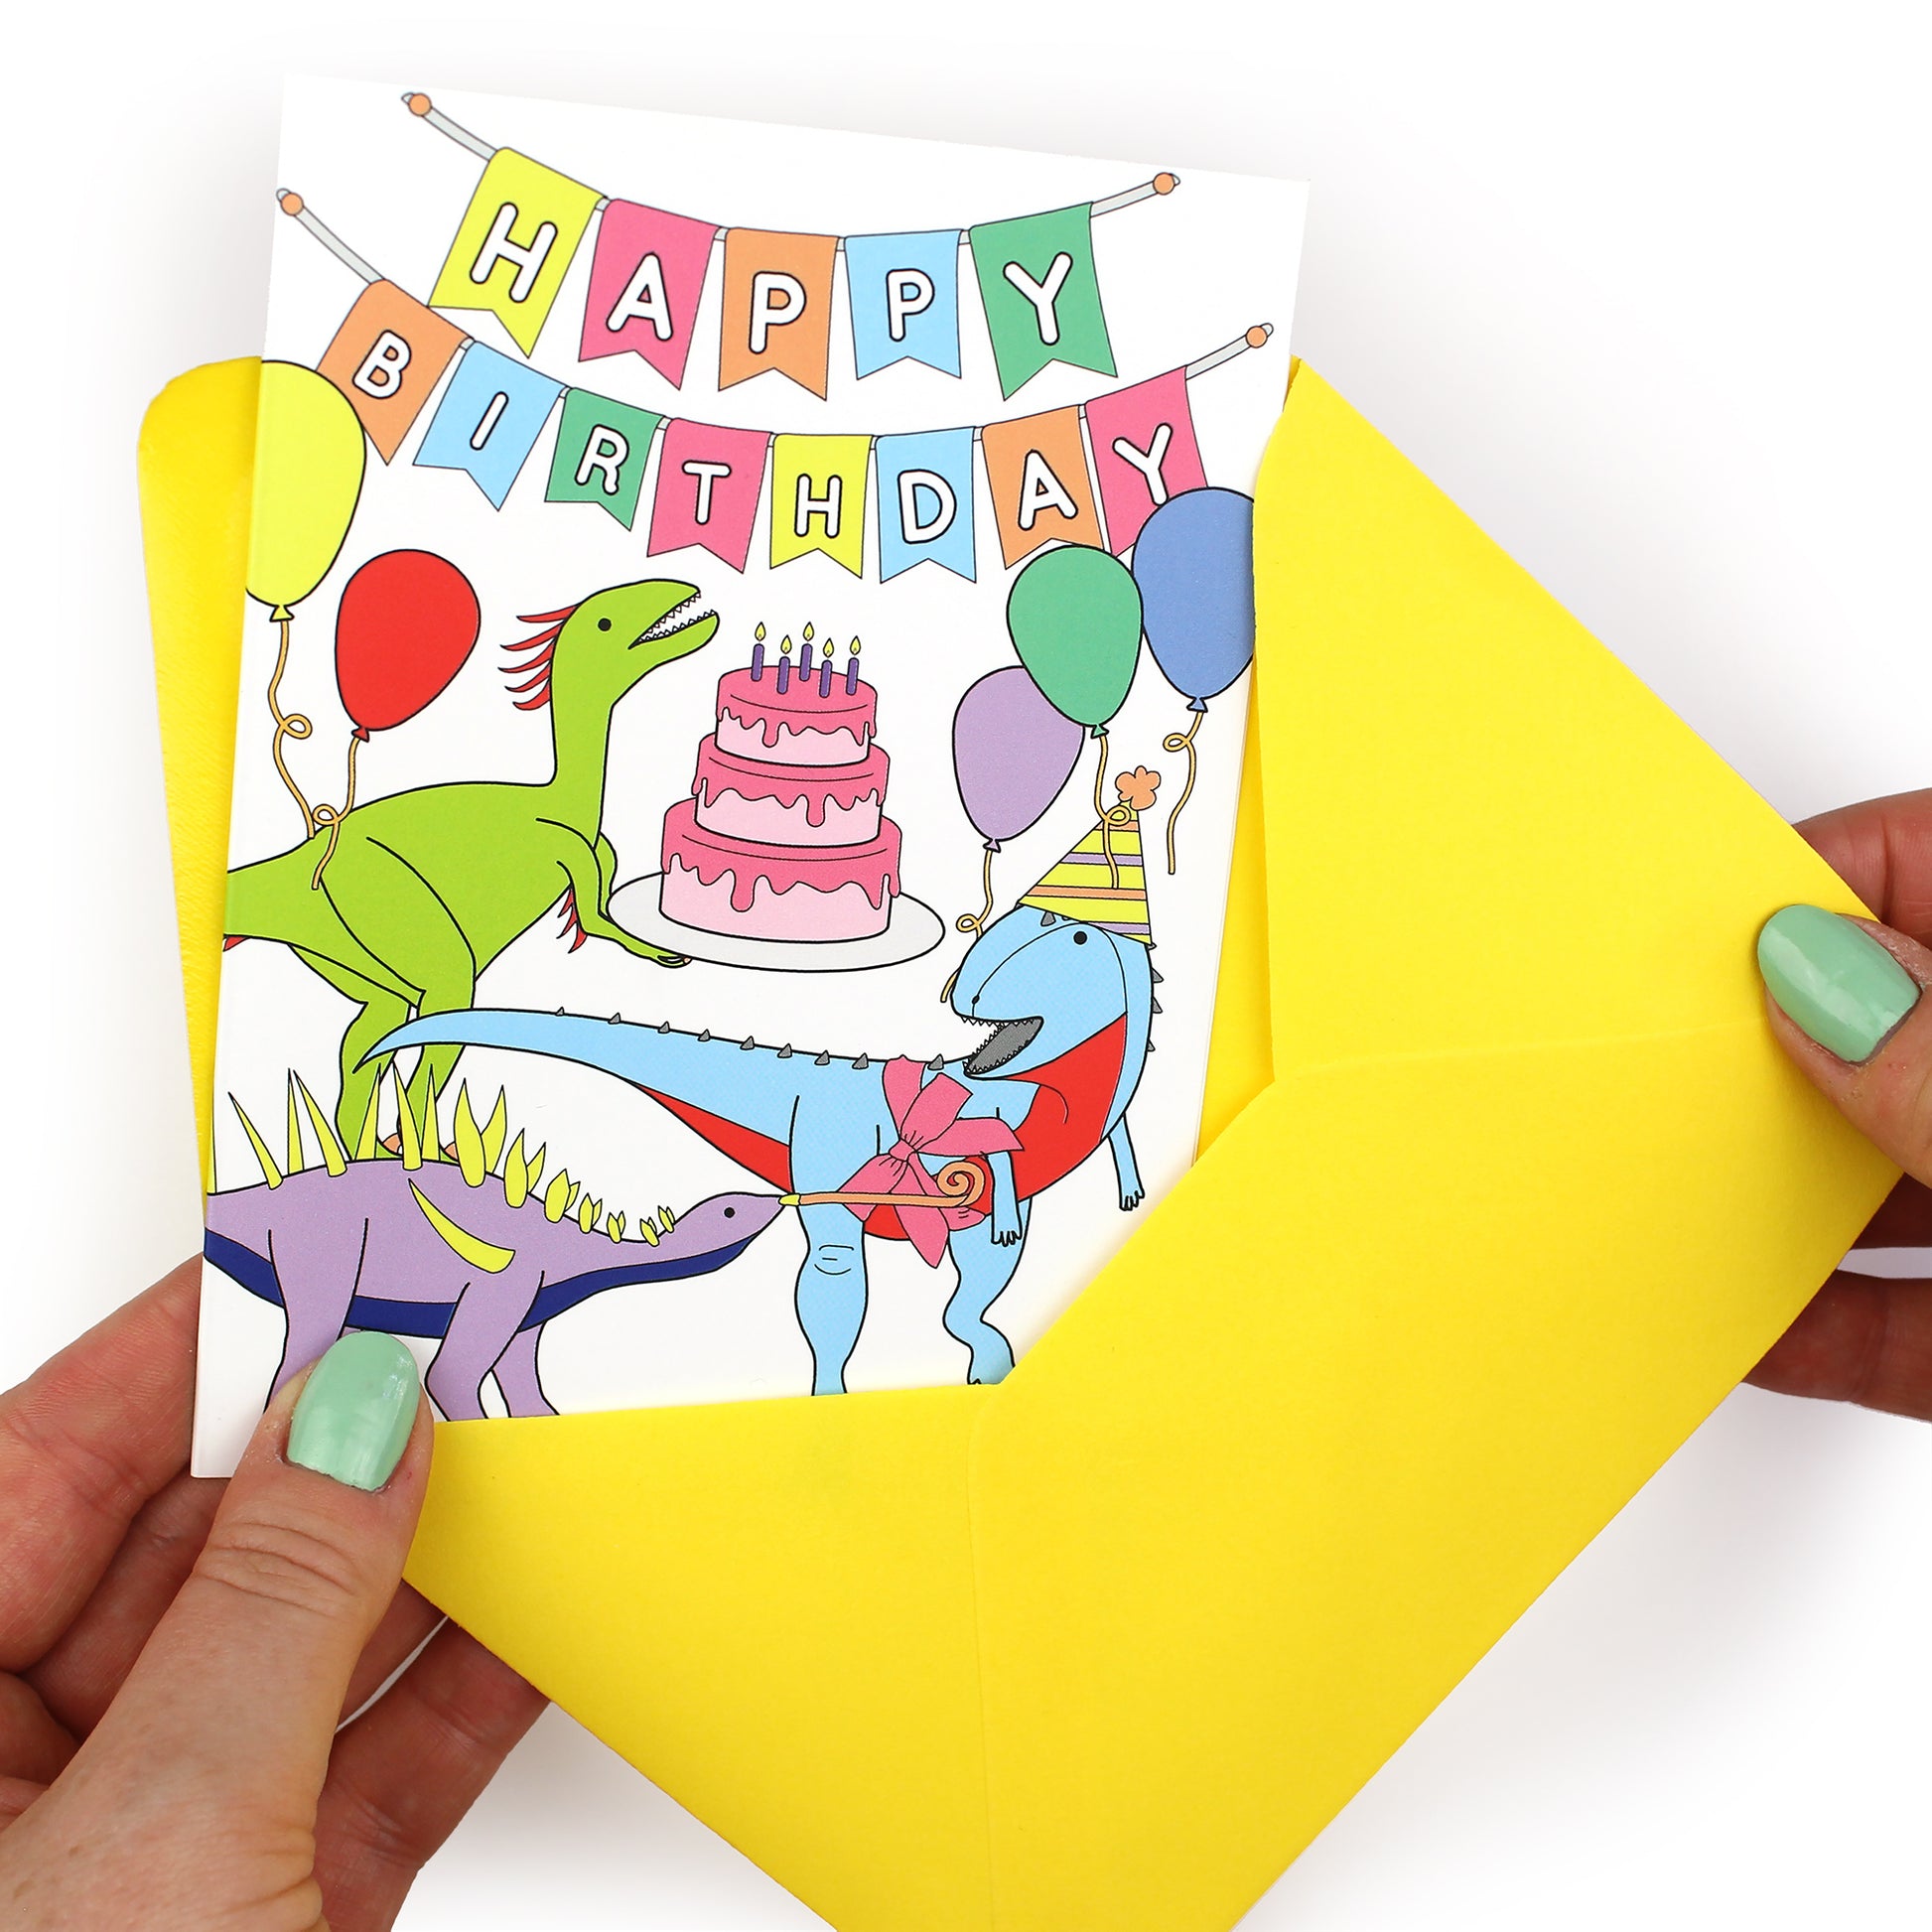 hands holding an envelope while removing the birthday party dinosaur card from the envelope